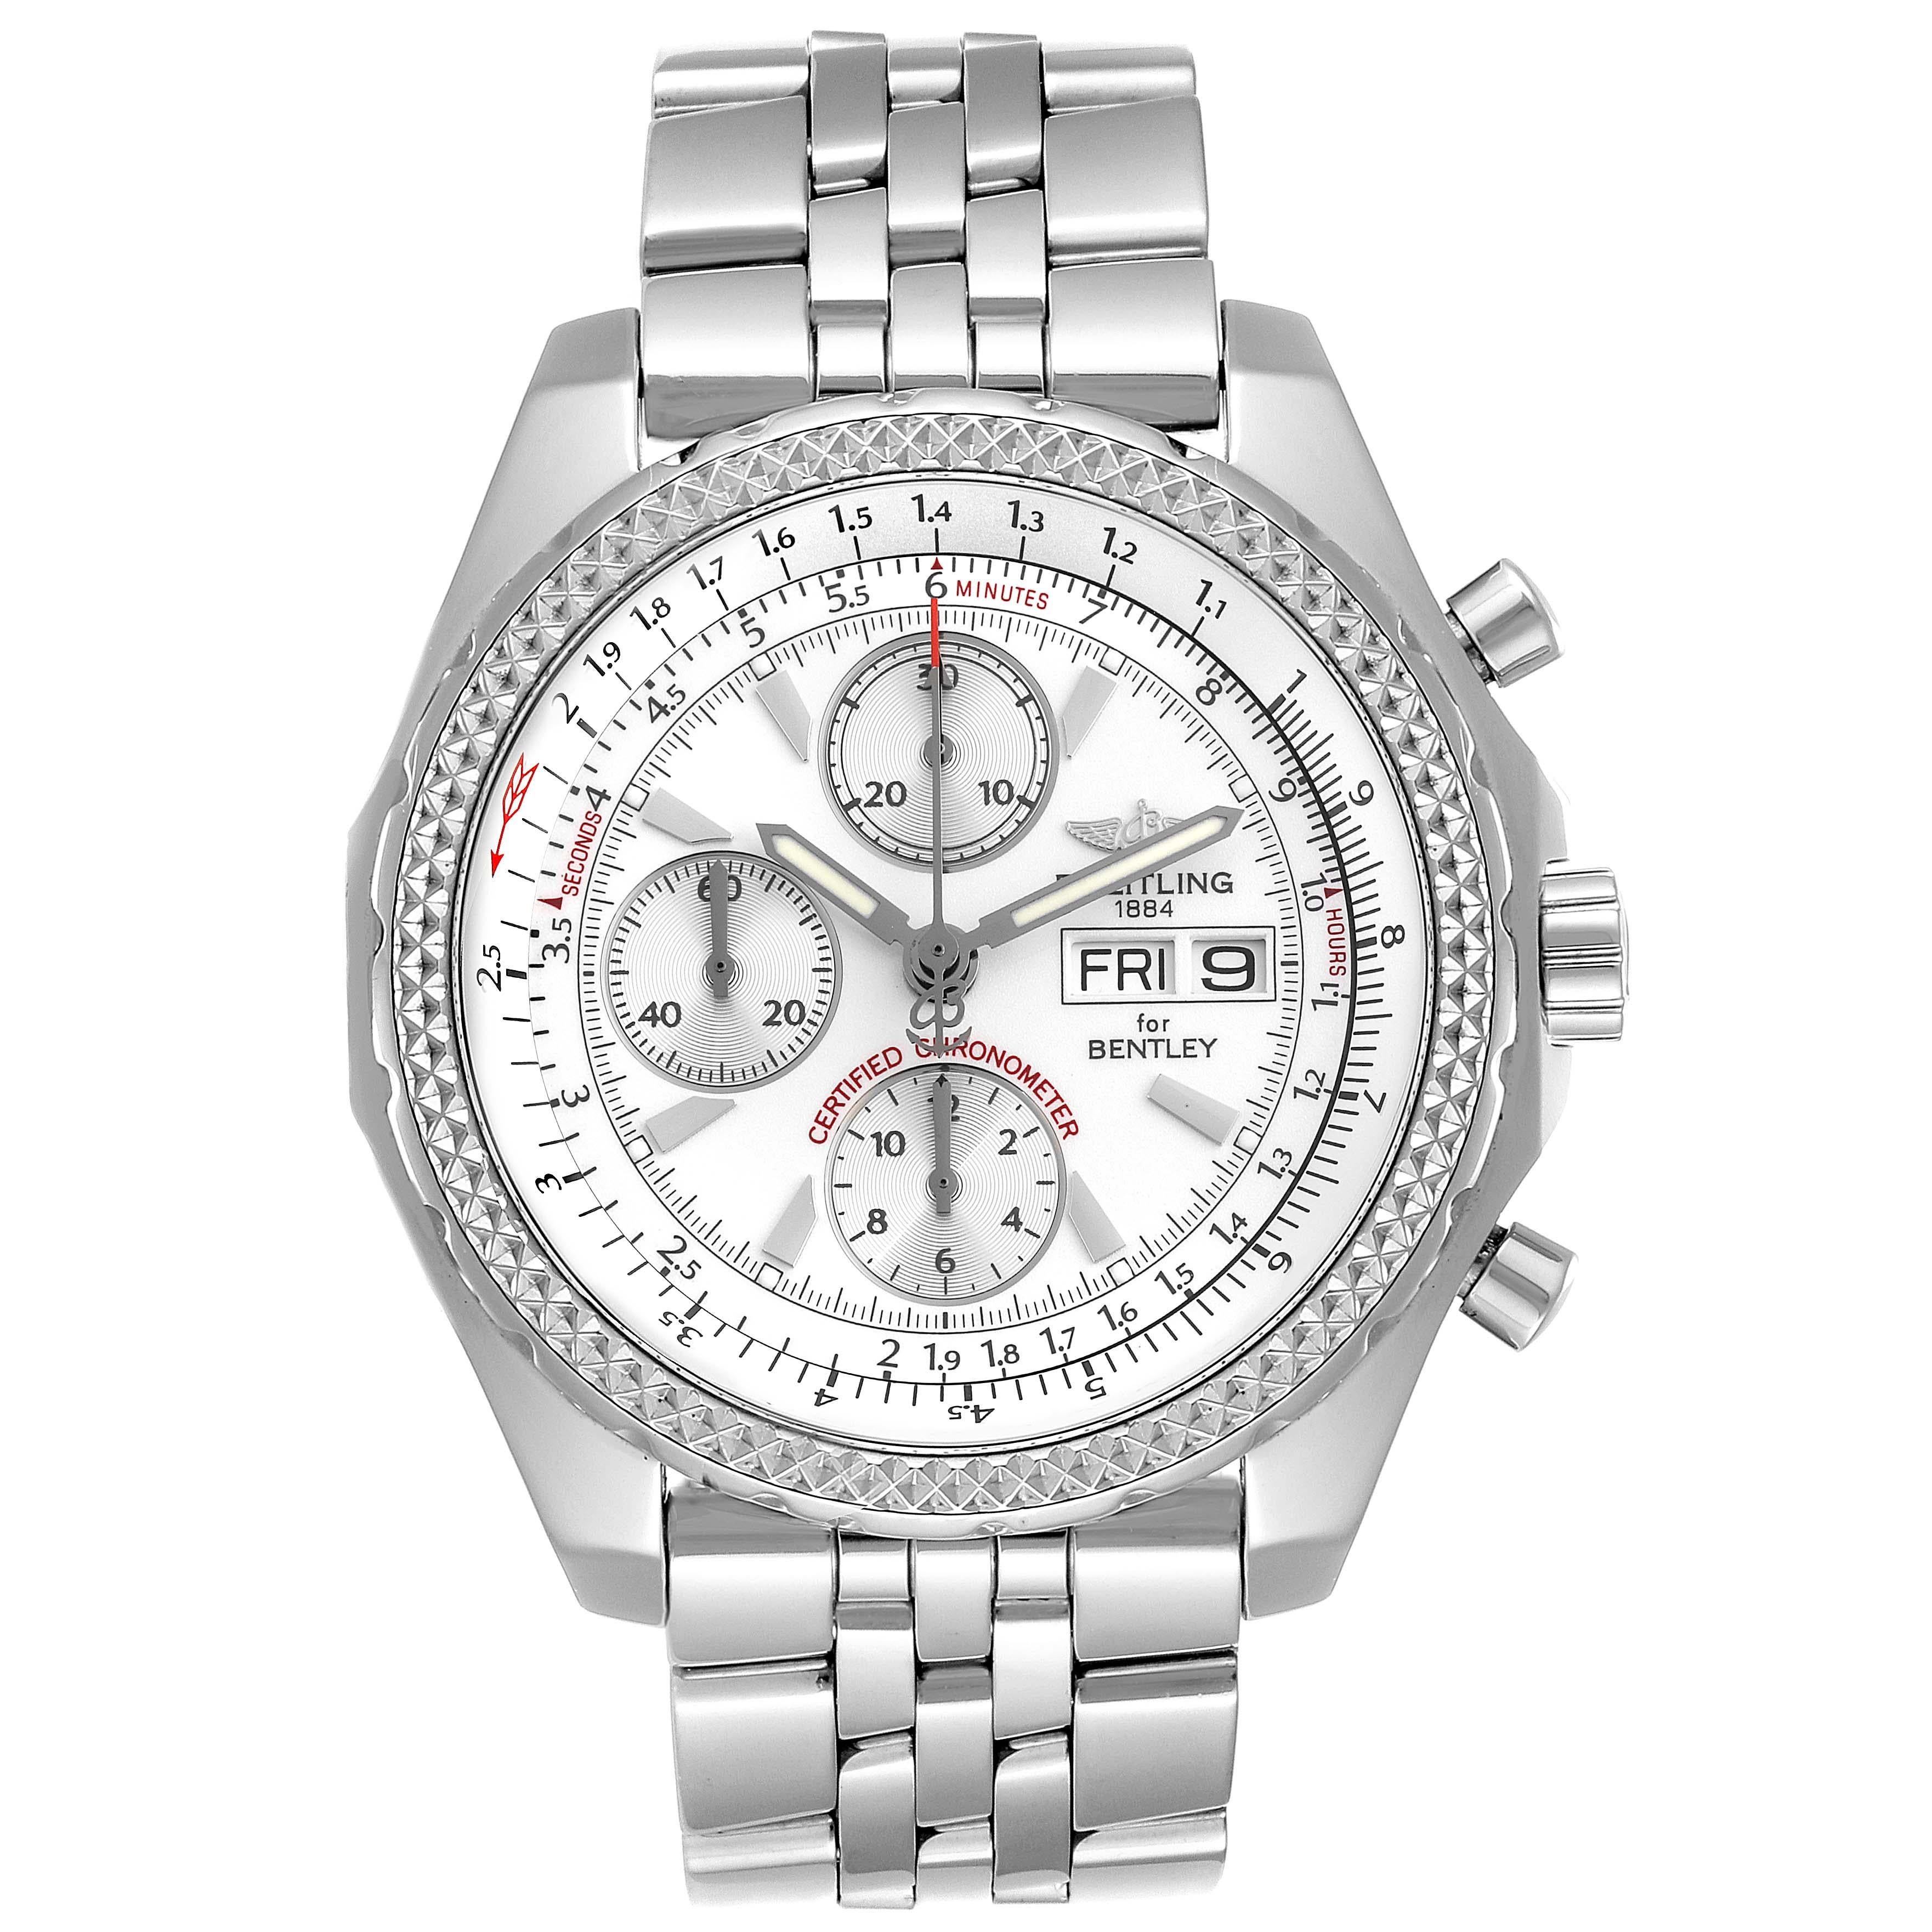 Breitling Bentley Motors GT Silver Dial Chronograph Mens Watch A13362. Self-winding automatic officially certified chronometer movement. Chronograph function. Stainless steel case 44.8 mm in diameter. Stainless steel screwed-down crown and pushers.